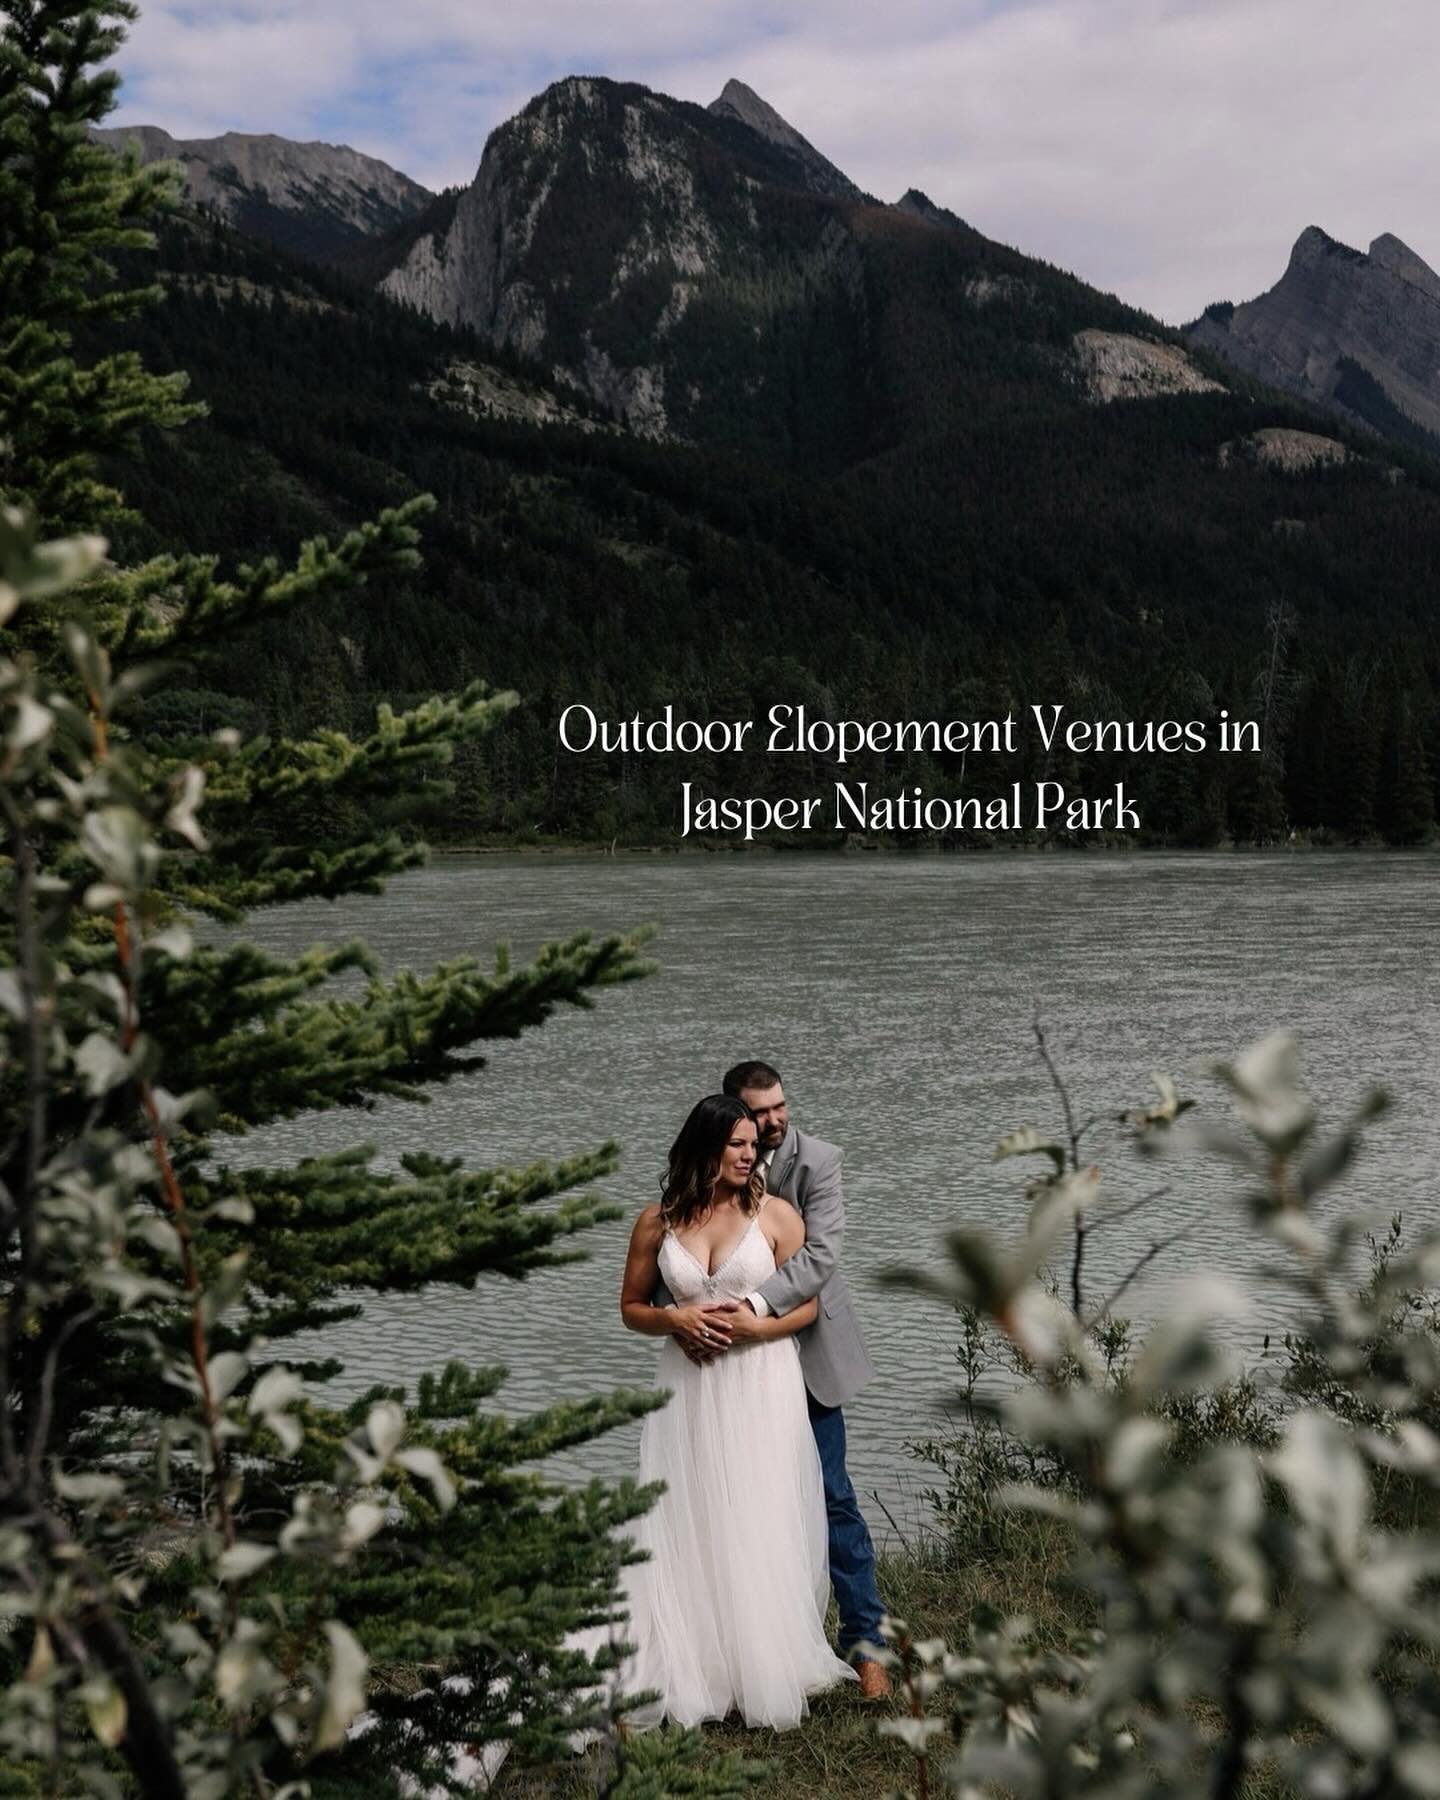 5 Outdoor Elopement Wedding Venues in Jasper 

Are you dreaming of a small, intimate elopement surrounded by the beauty of nature? Jasper National Park offers pristine landscapes and serene outdoor venues for you to have your Elopement or small weddi